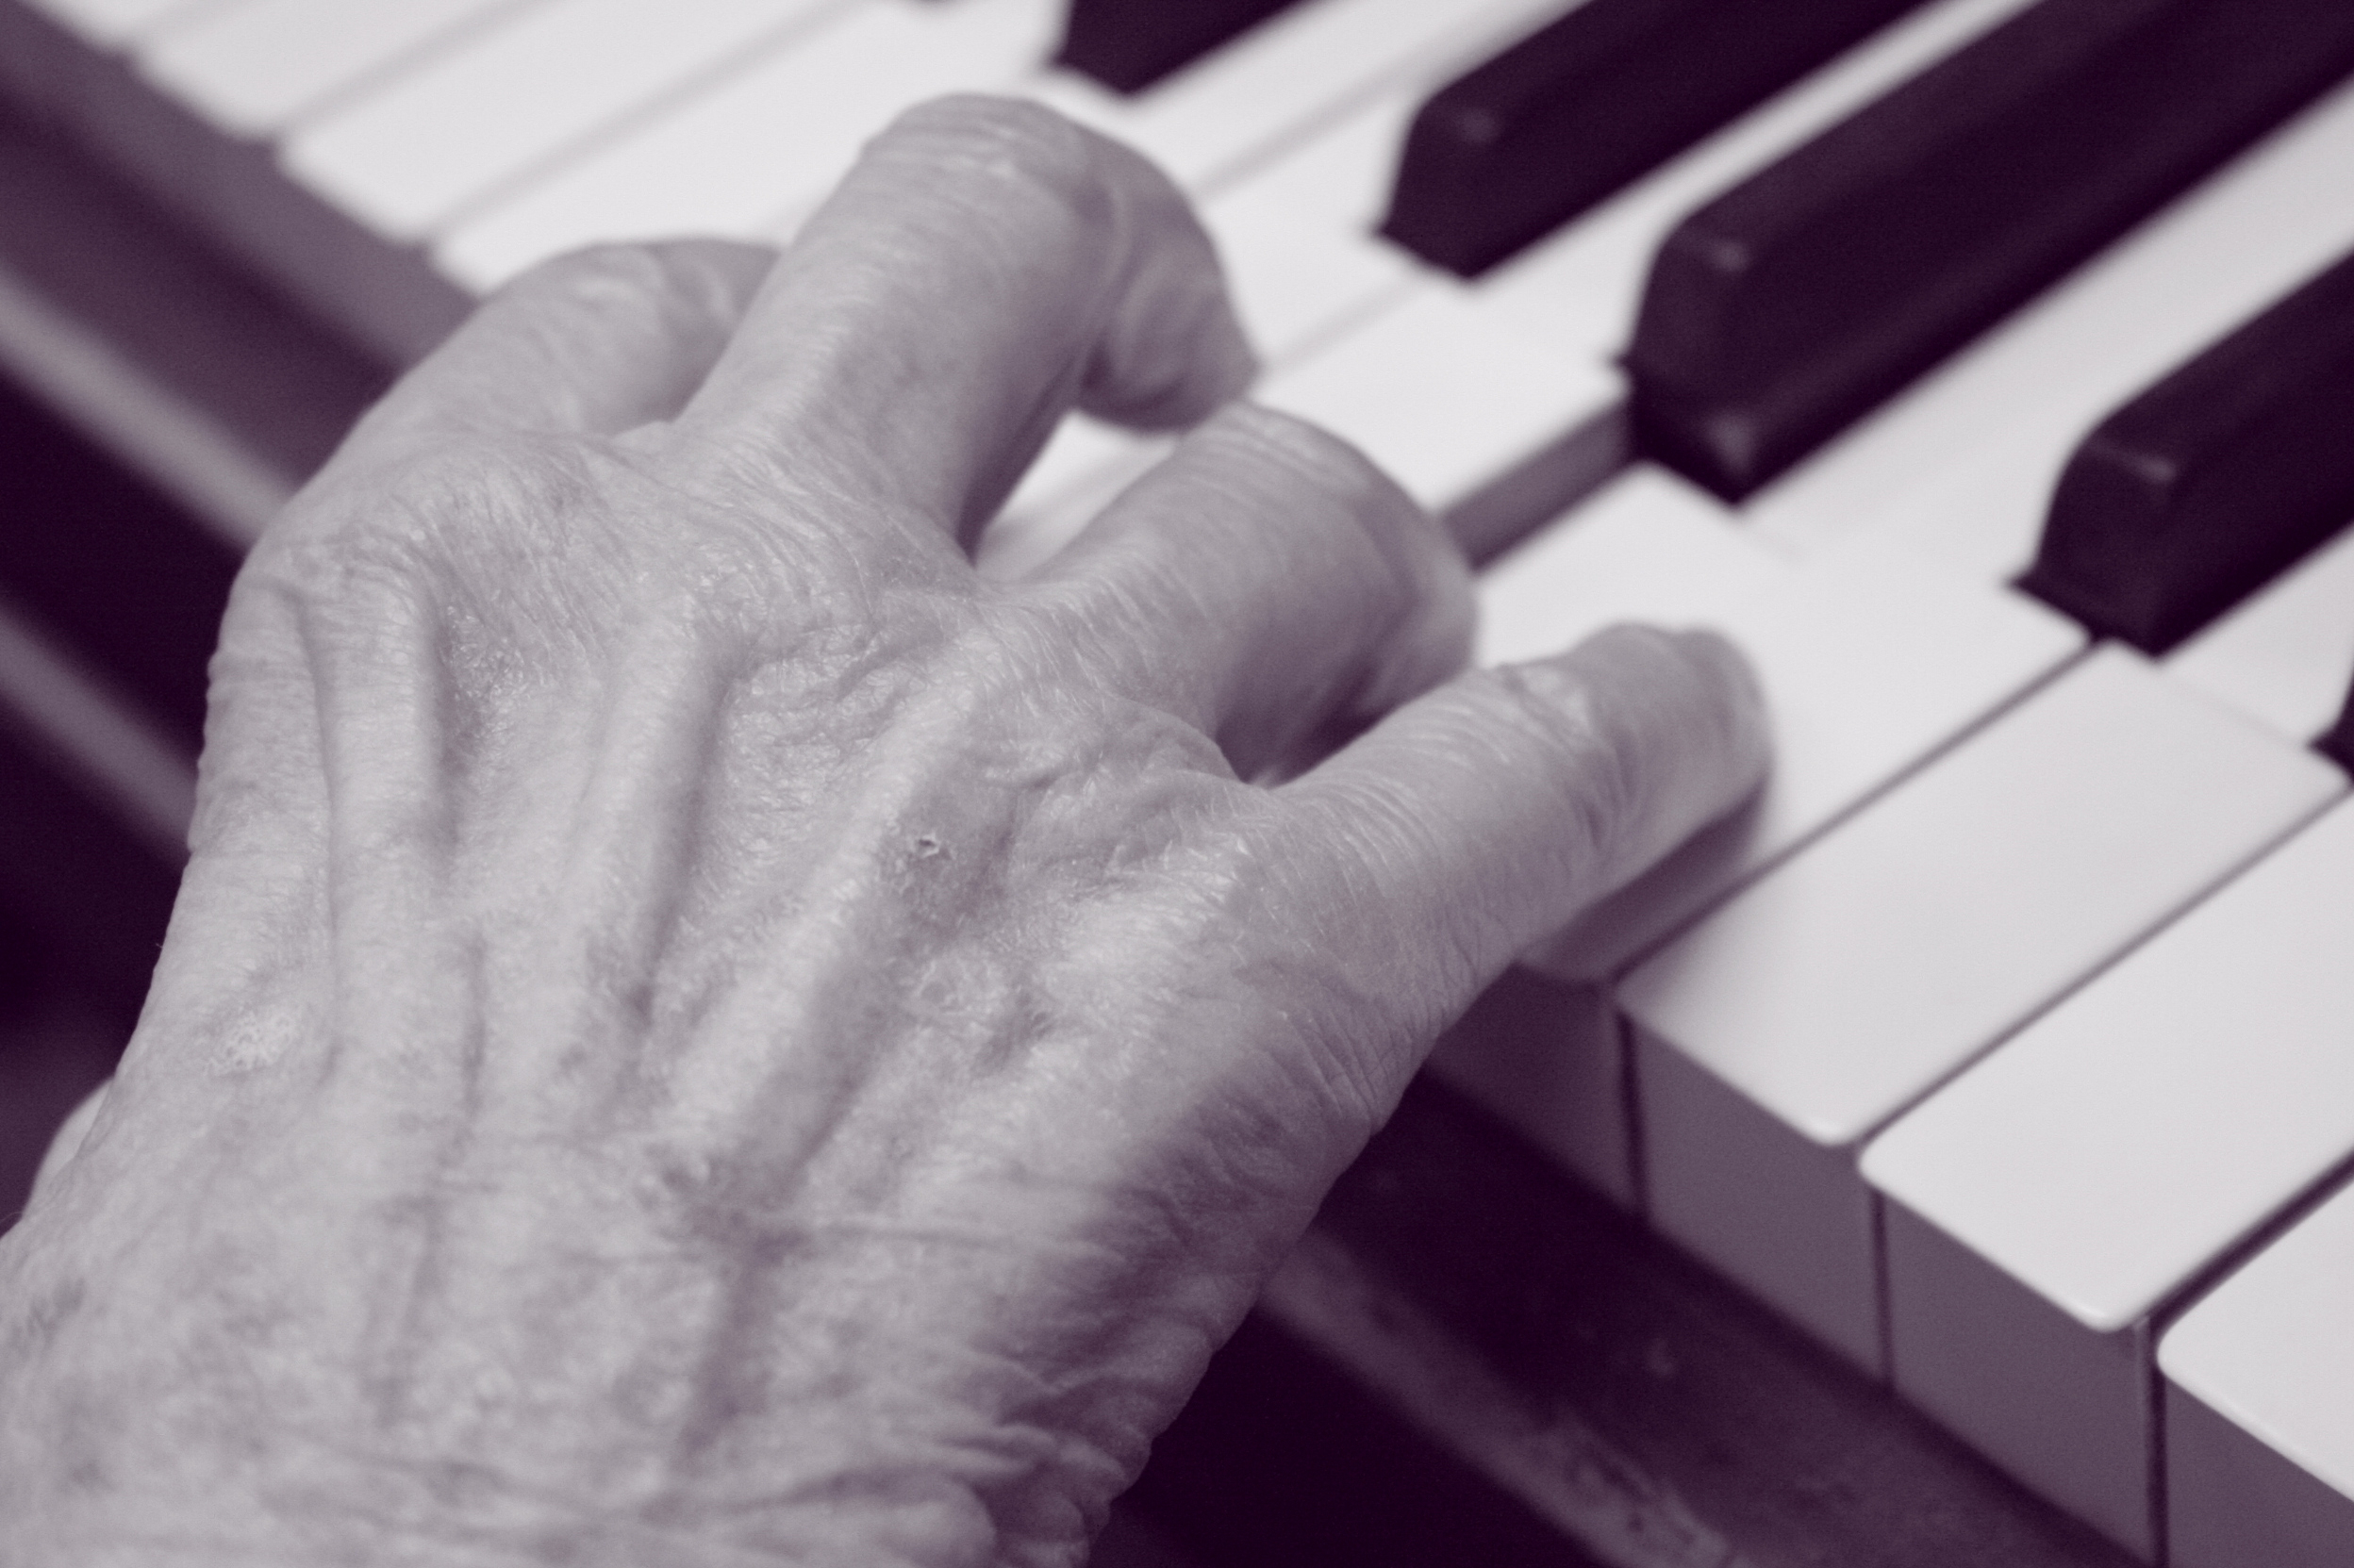 103-year-old woman plays piano for fellow seniors everyday